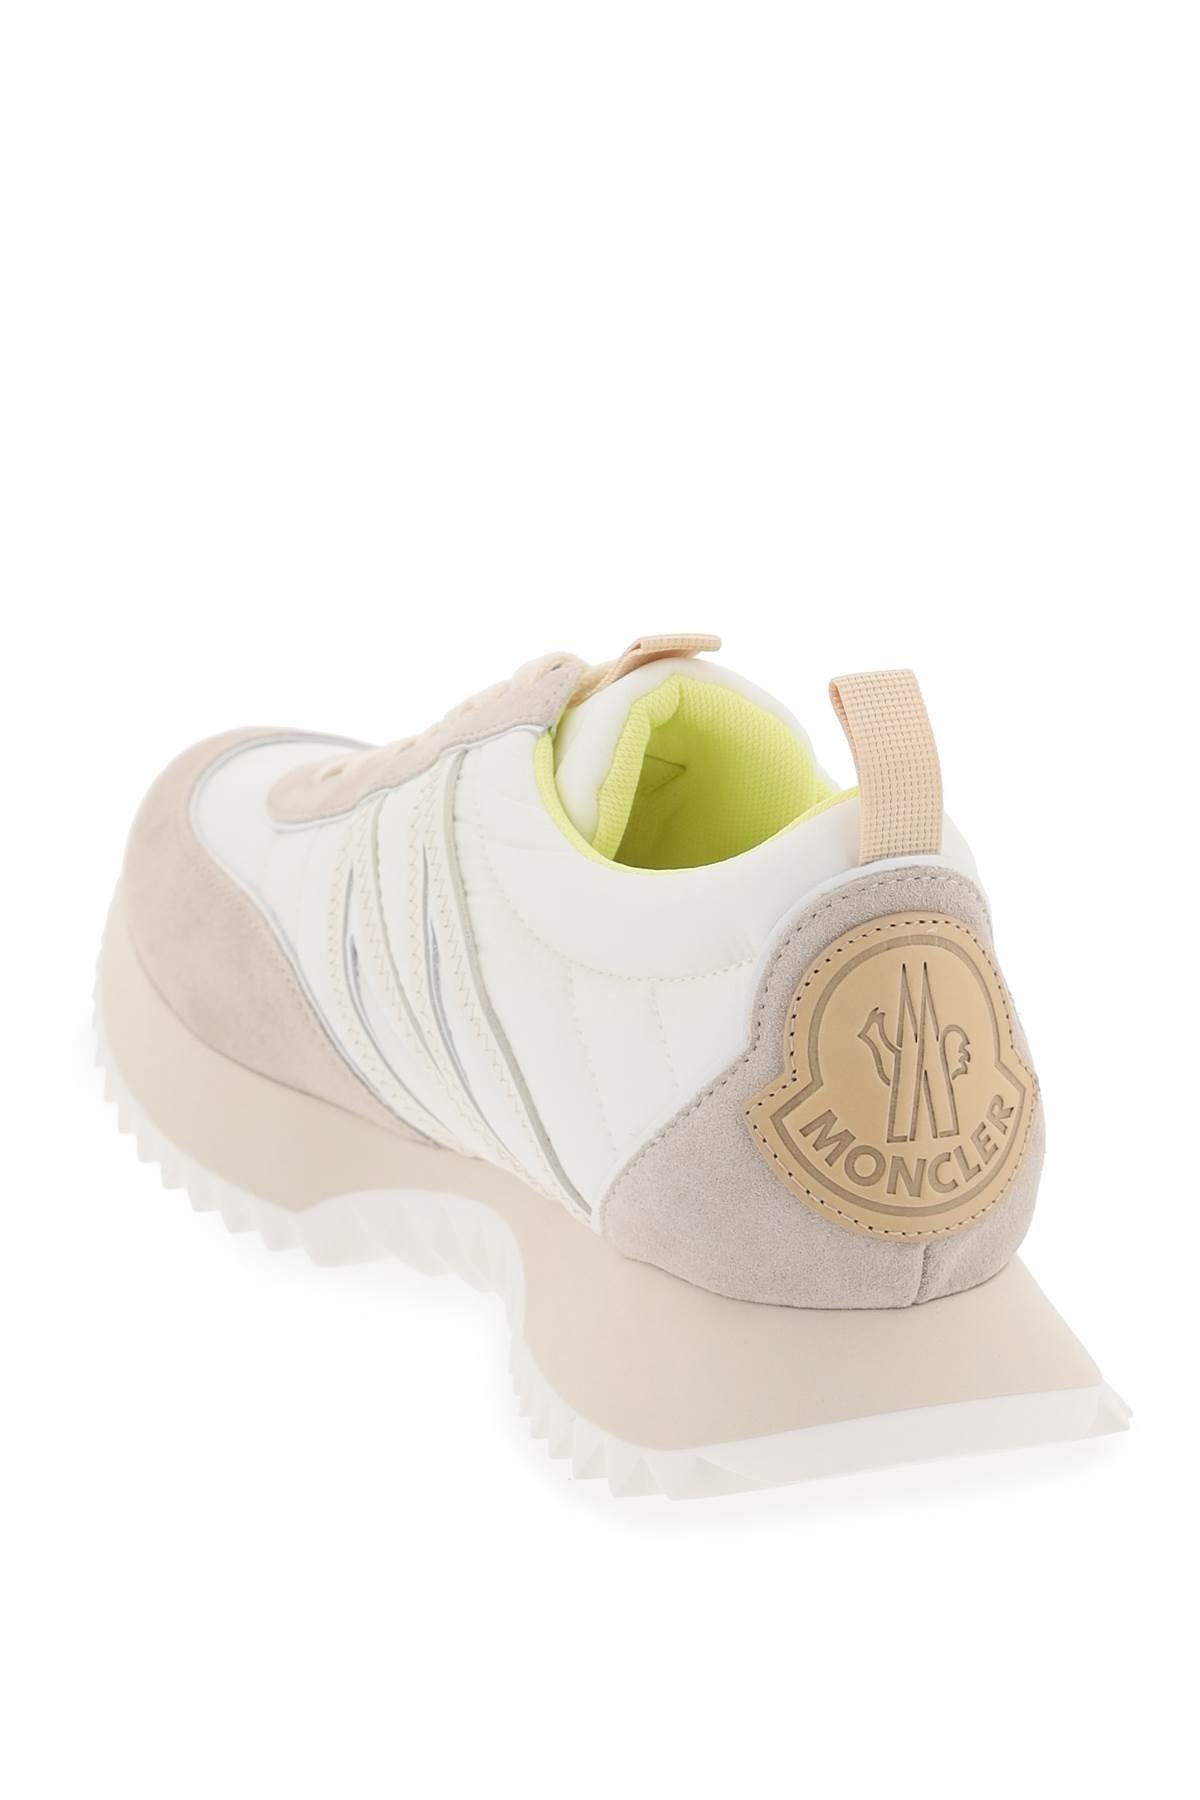 Moncler Basic Pacey Sneakers In Nylon And Suede Leather. Women - 3